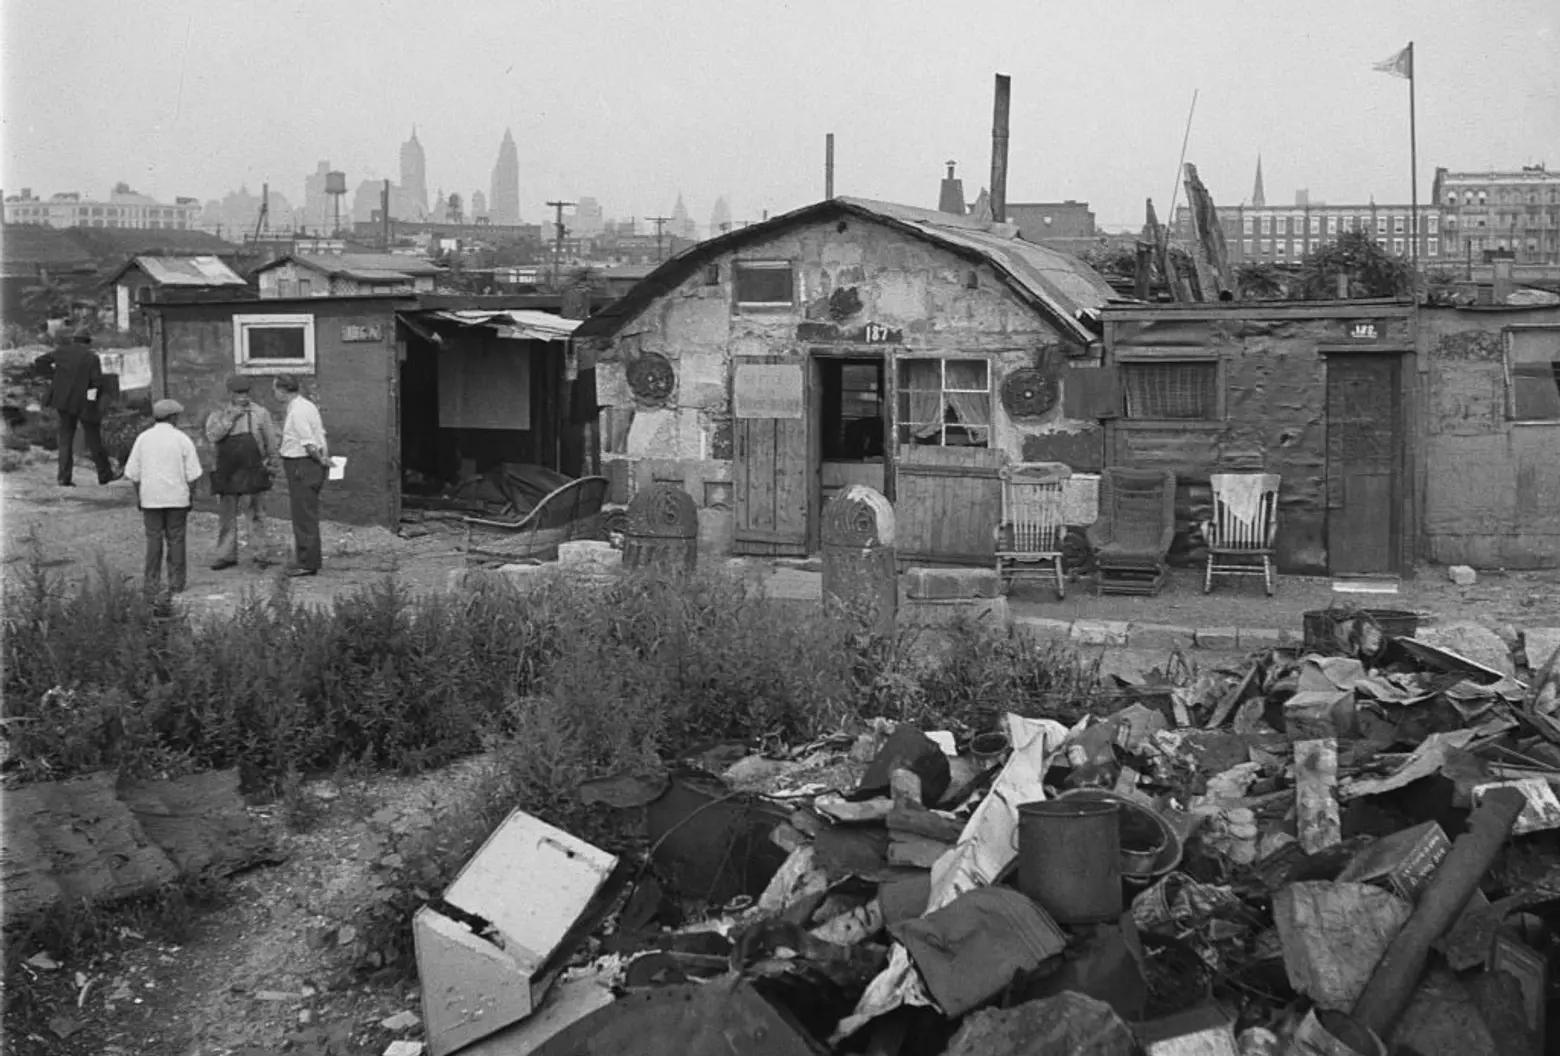 Looking back at the Depression-era shanty towns in New York City parks